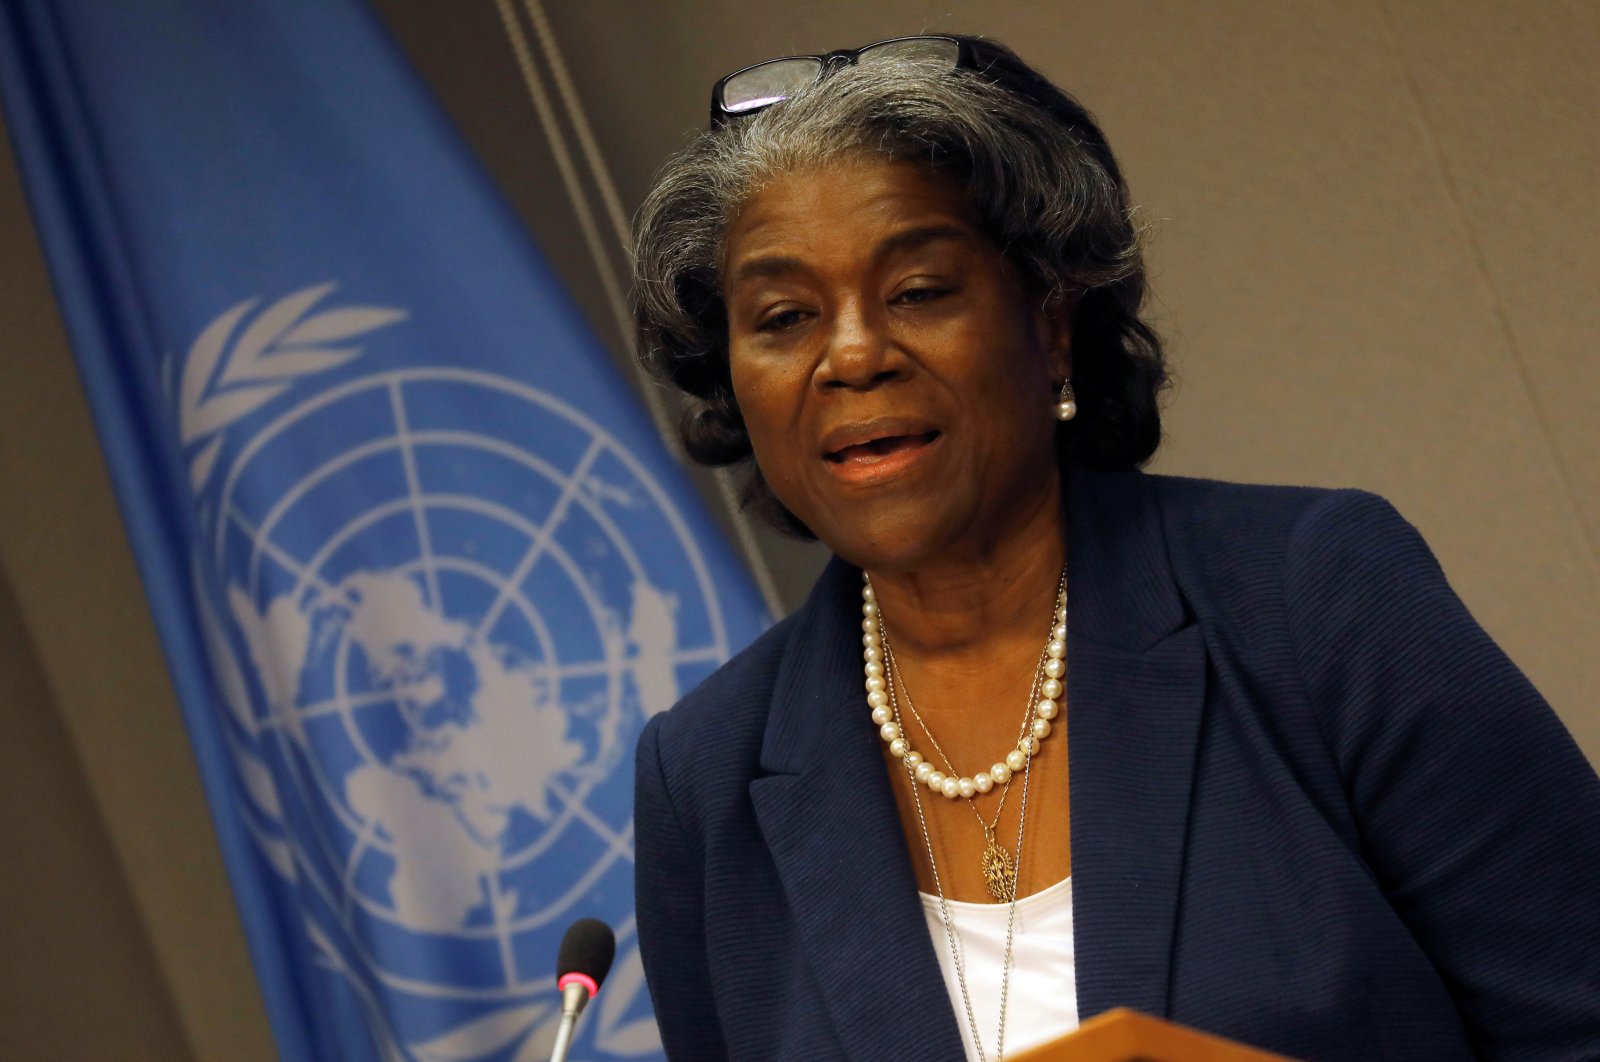 New U.S. Ambassador to the United Nations Linda Thomas-Greenfield holds a news conference to mark the start of the U.S. presidency of the U.N. Security Council for March, at the U.N. headquarters in New York, U.S., March 1, 2021. (Reuters Photo)